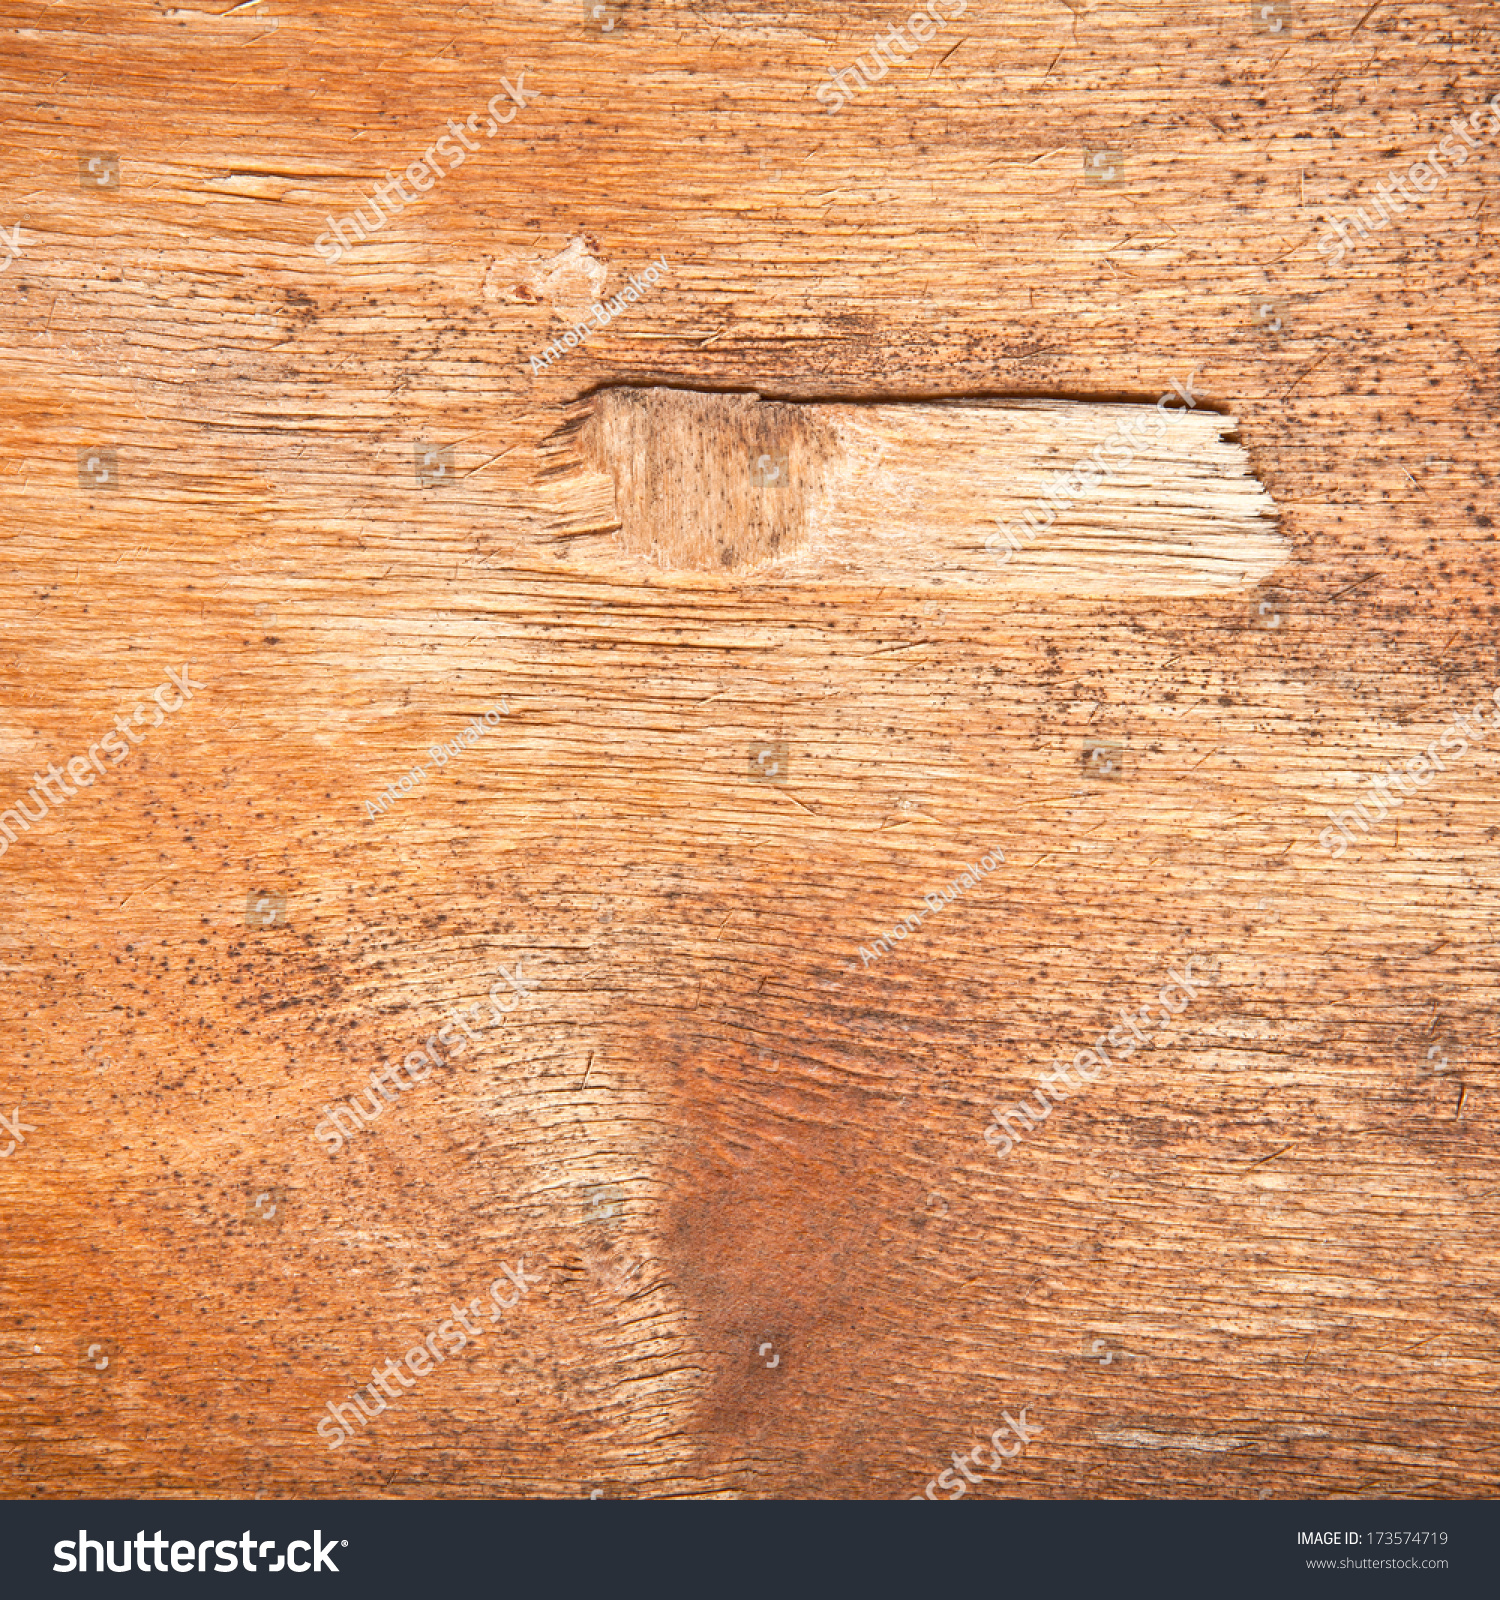 Old Plywood Background Stock Photo 173574719 - Shutterstock